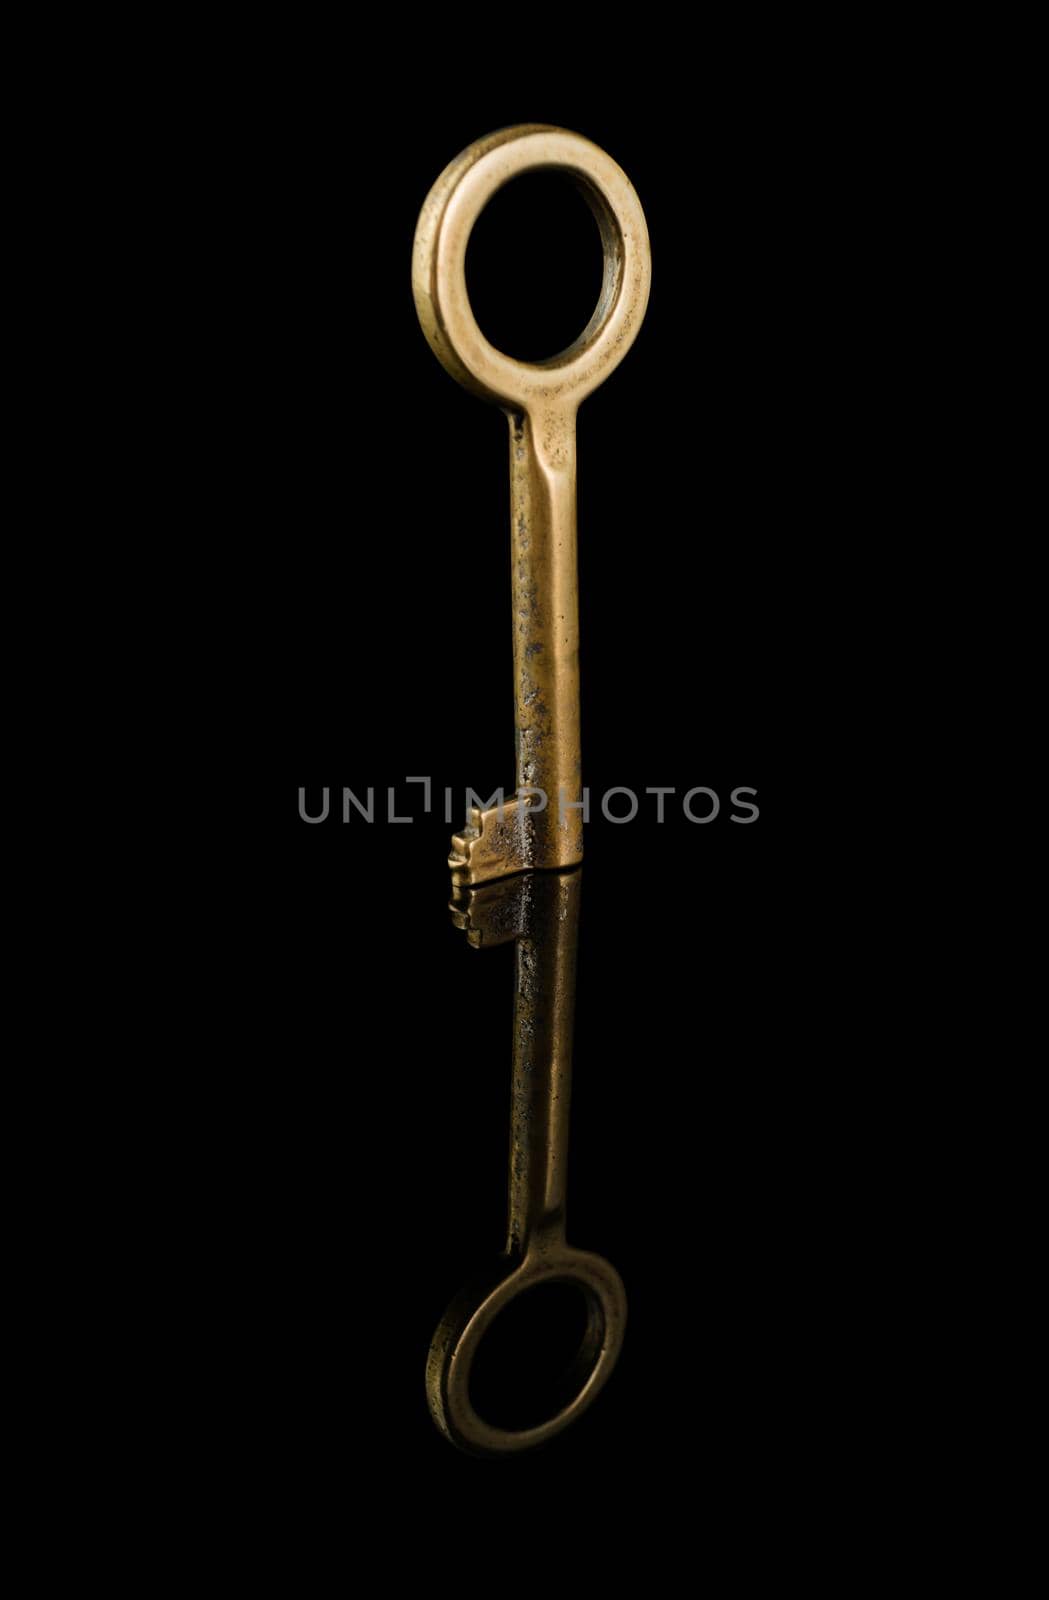 Old key, close up, on a black background isolated, with reflection